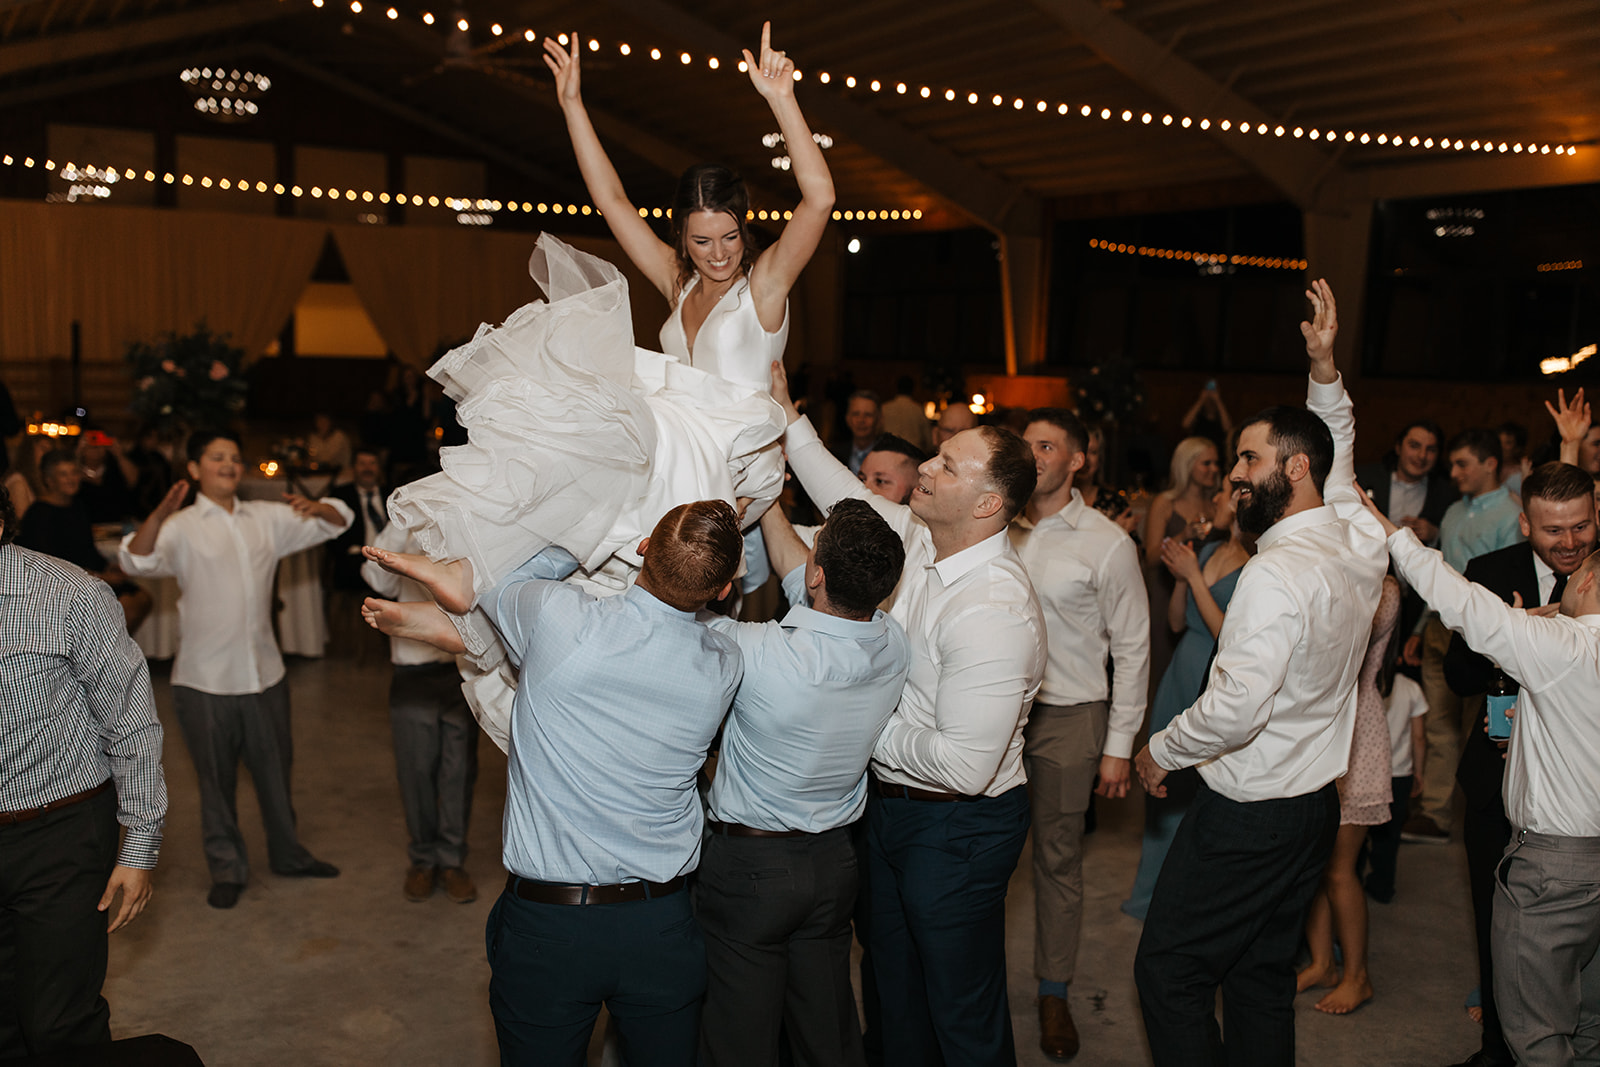 the bride getting lifted up by the party